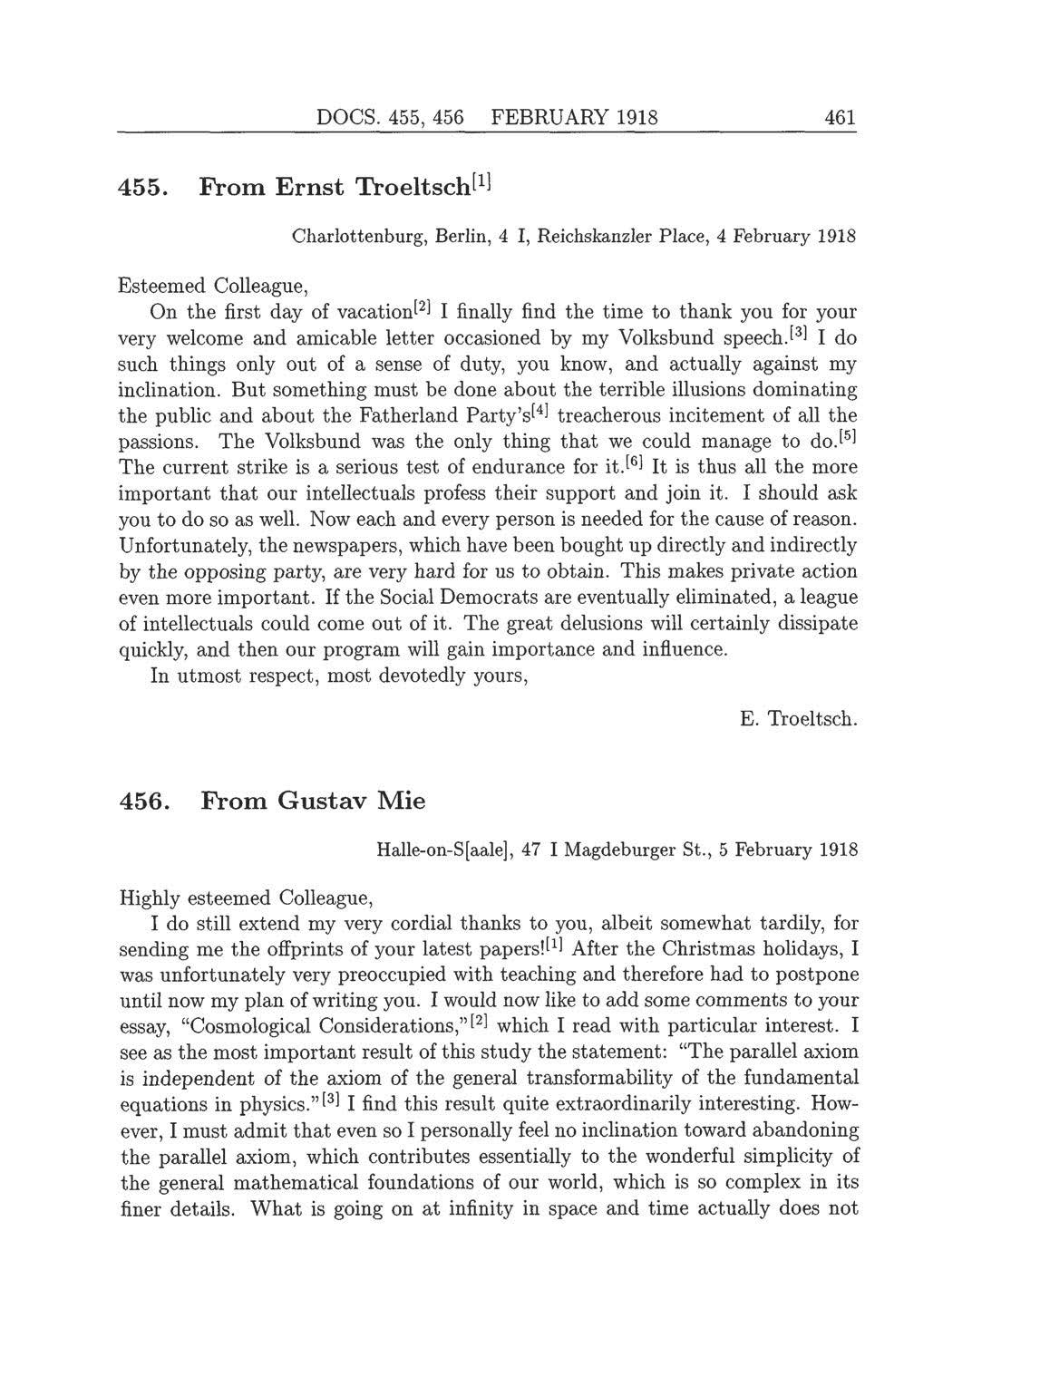 Volume 8: The Berlin Years: Correspondence, 1914-1918 (English translation supplement) page 461